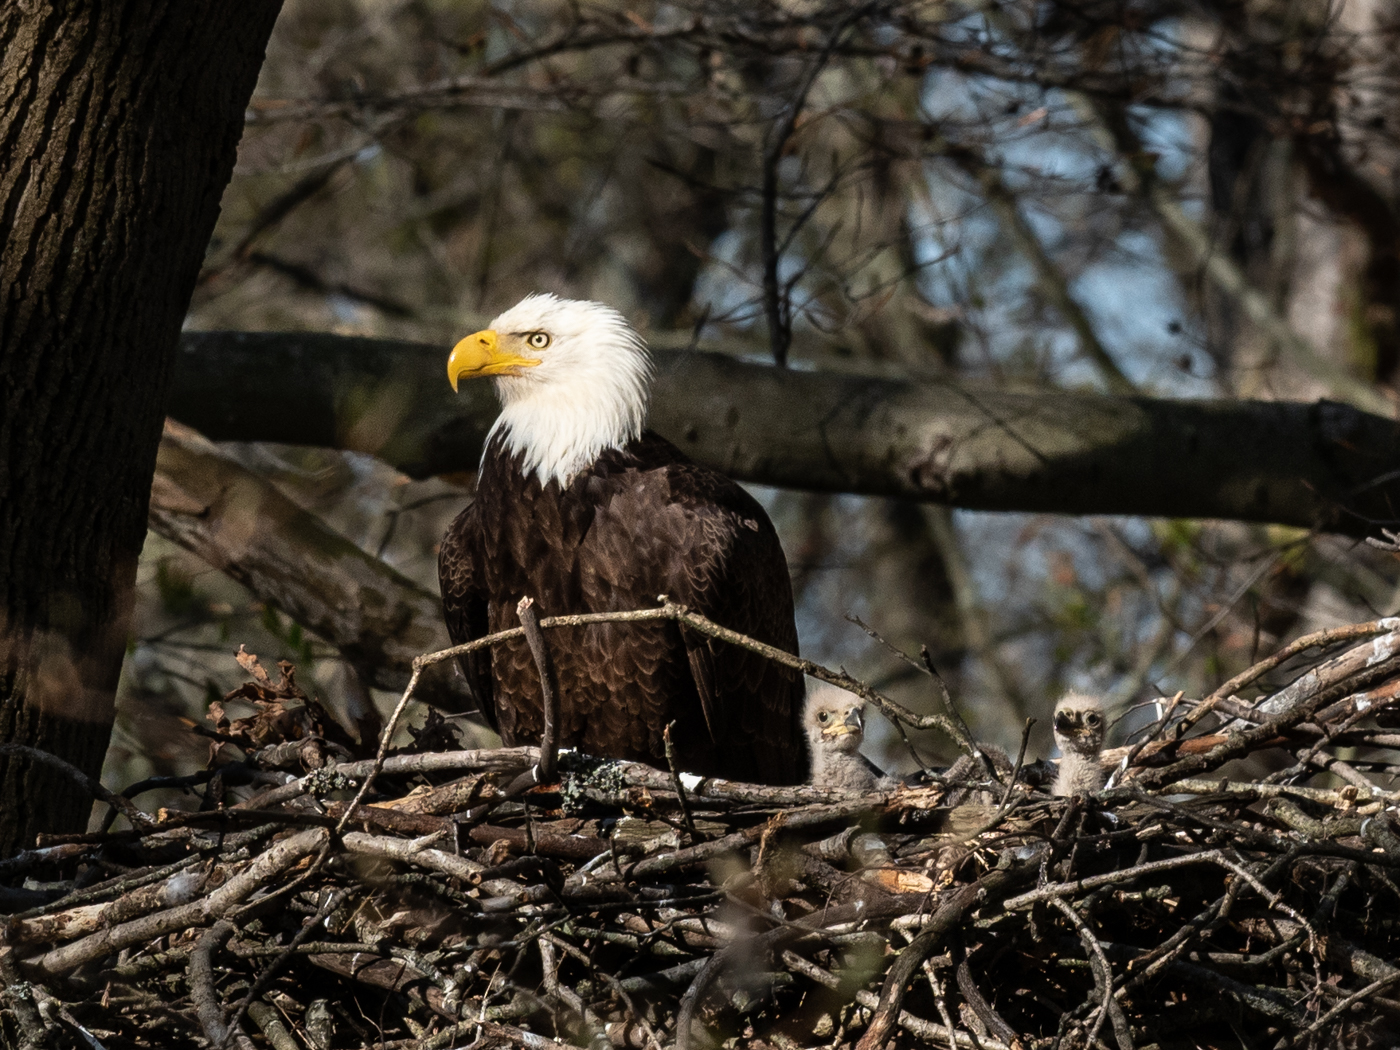 Bald Eagle in nest with baby chicks